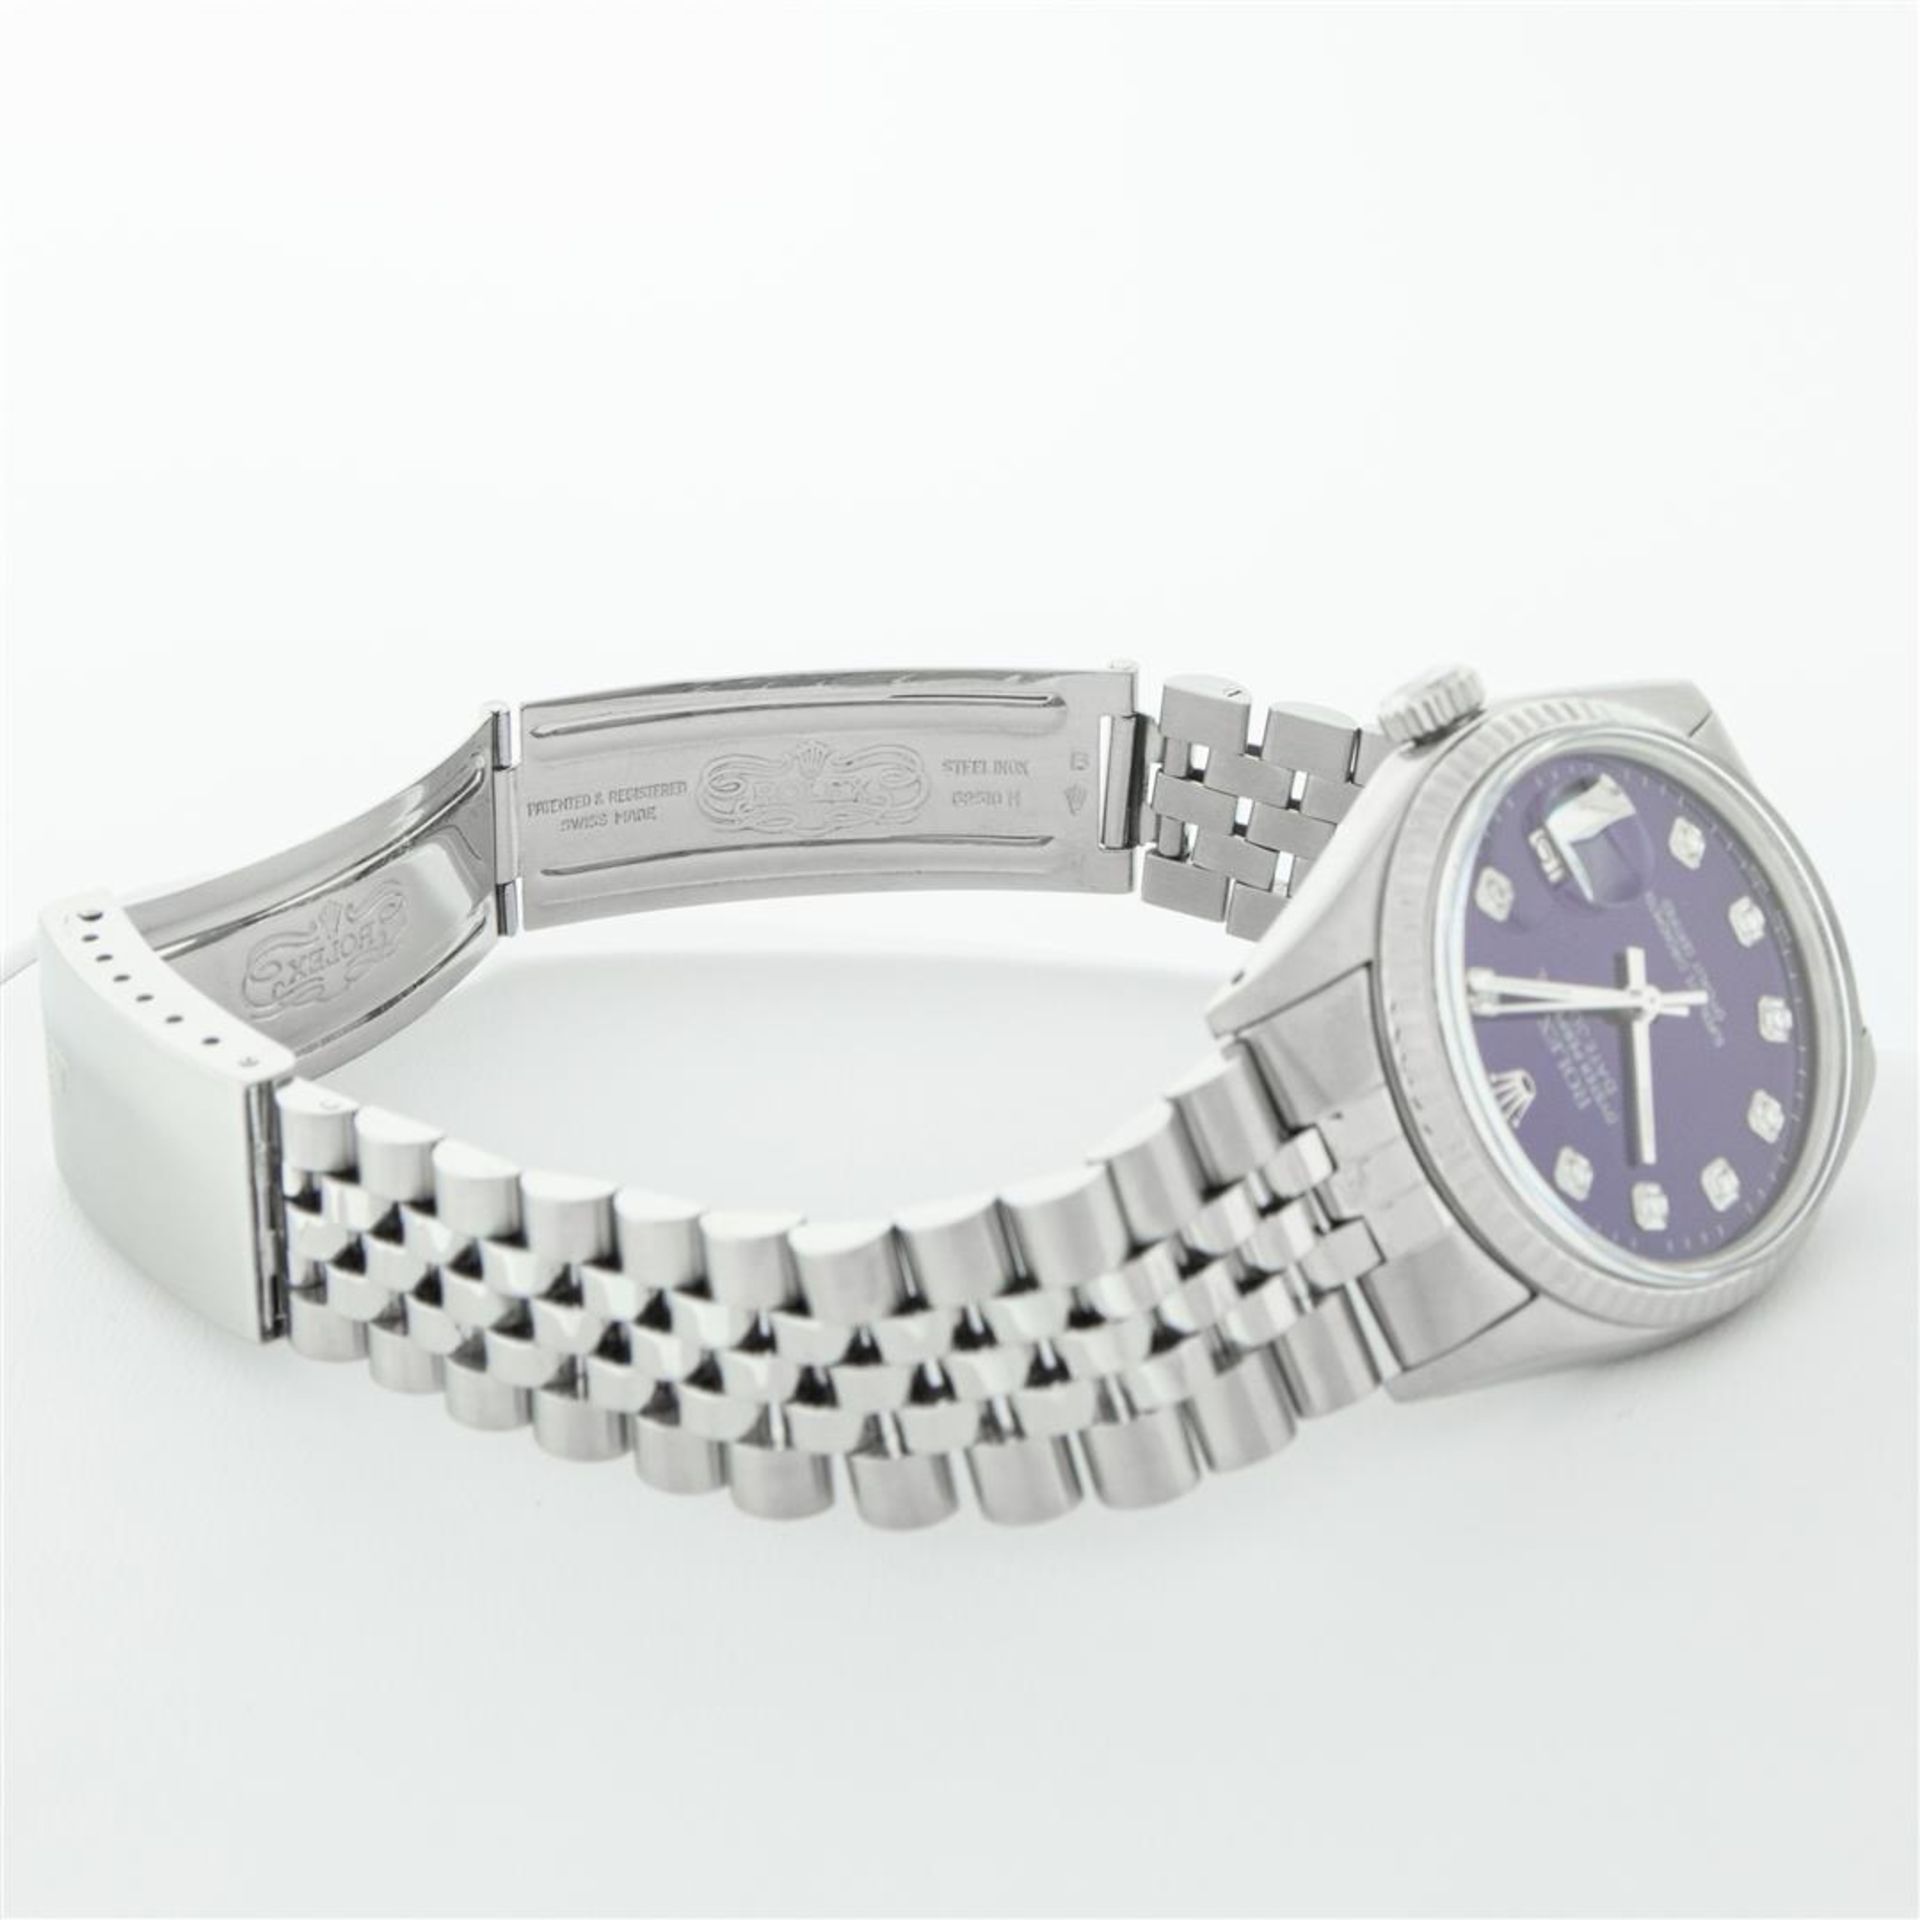 Rolex Mens Stainless Steel Purple Diamond 36MM Datejust Oyster Perpetual Wristwa - Image 8 of 9